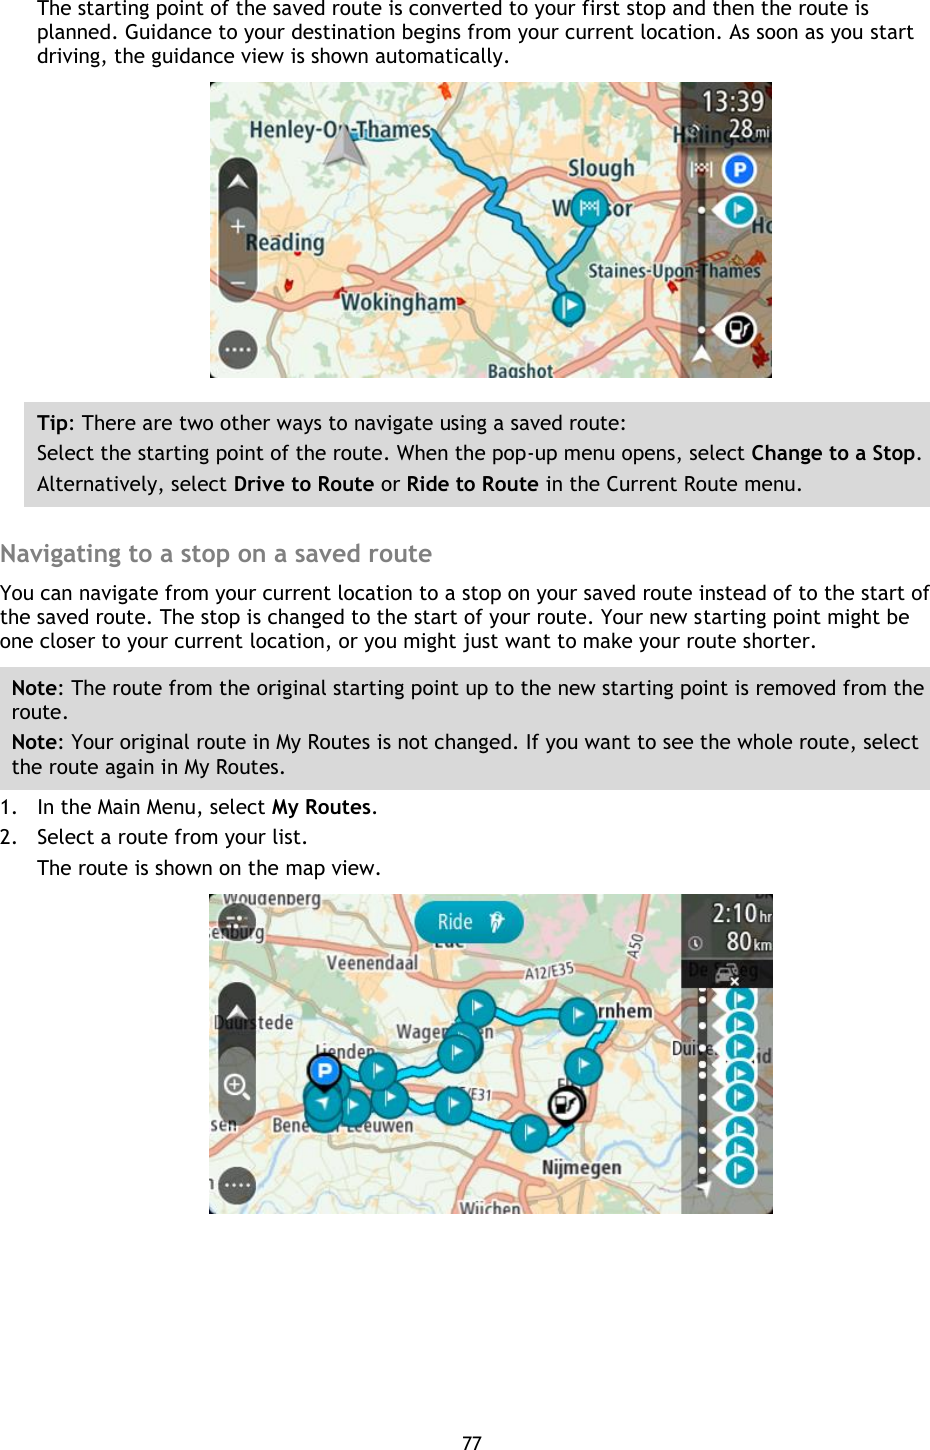 77    The starting point of the saved route is converted to your first stop and then the route is planned. Guidance to your destination begins from your current location. As soon as you start driving, the guidance view is shown automatically.  Tip: There are two other ways to navigate using a saved route: Select the starting point of the route. When the pop-up menu opens, select Change to a Stop. Alternatively, select Drive to Route or Ride to Route in the Current Route menu.  Navigating to a stop on a saved route You can navigate from your current location to a stop on your saved route instead of to the start of the saved route. The stop is changed to the start of your route. Your new starting point might be one closer to your current location, or you might just want to make your route shorter. Note: The route from the original starting point up to the new starting point is removed from the route.   Note: Your original route in My Routes is not changed. If you want to see the whole route, select the route again in My Routes. 1. In the Main Menu, select My Routes. 2. Select a route from your list. The route is shown on the map view.  